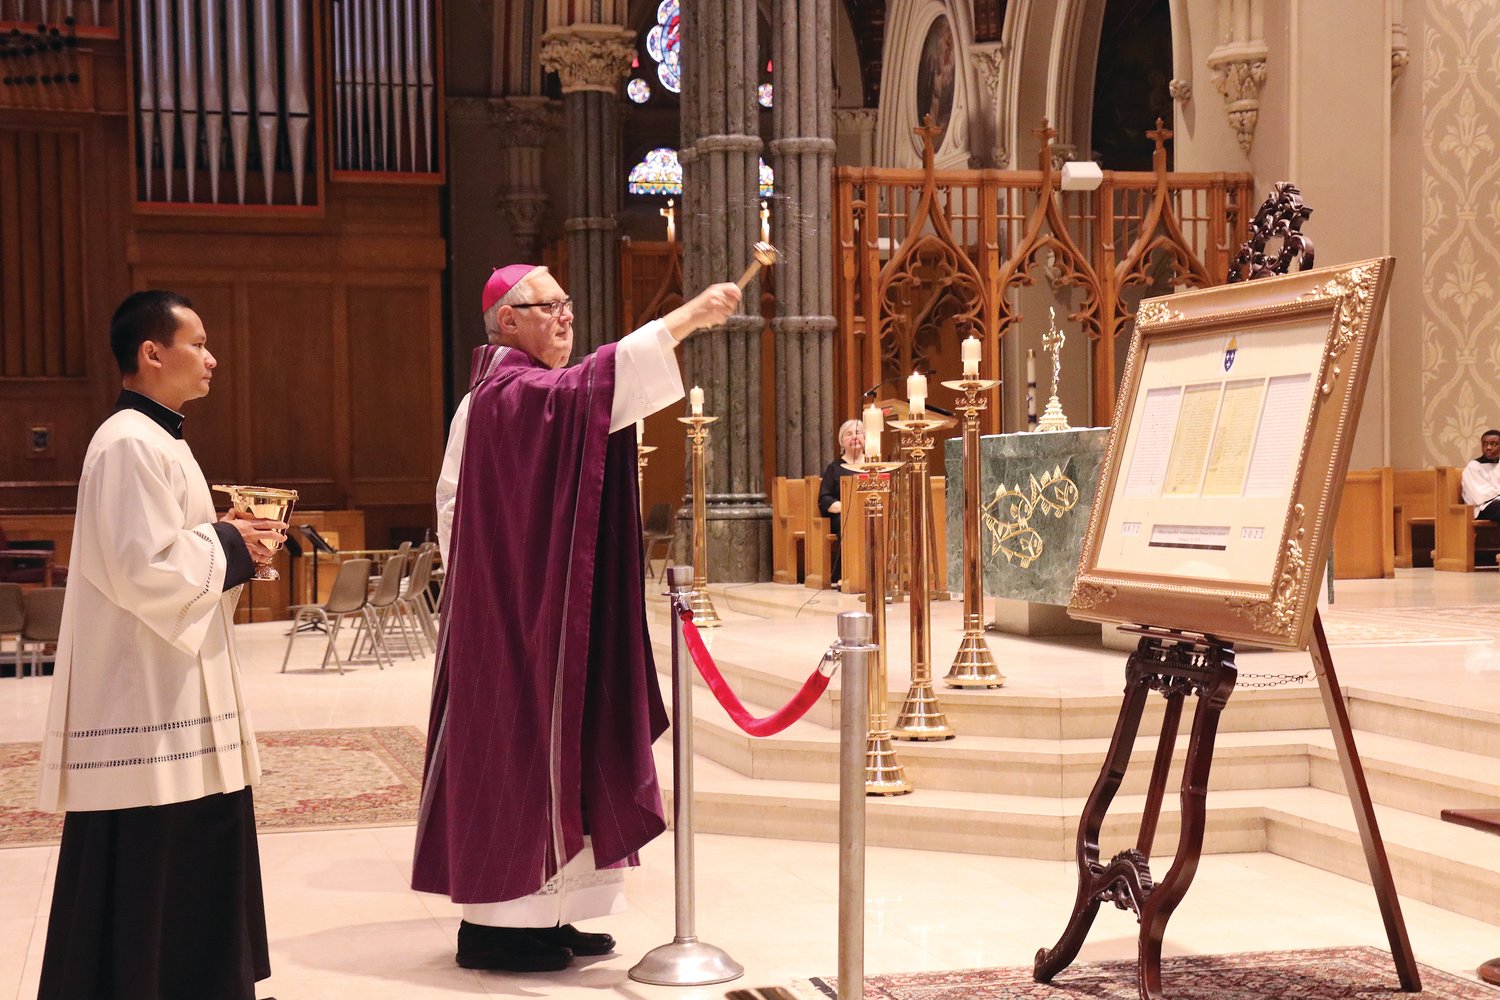 On Sunday, Dec. 5, Bishop Thomas J. Tobin blessed an authentic copy of the papal bull issued by the Holy See on February 16, 1872.